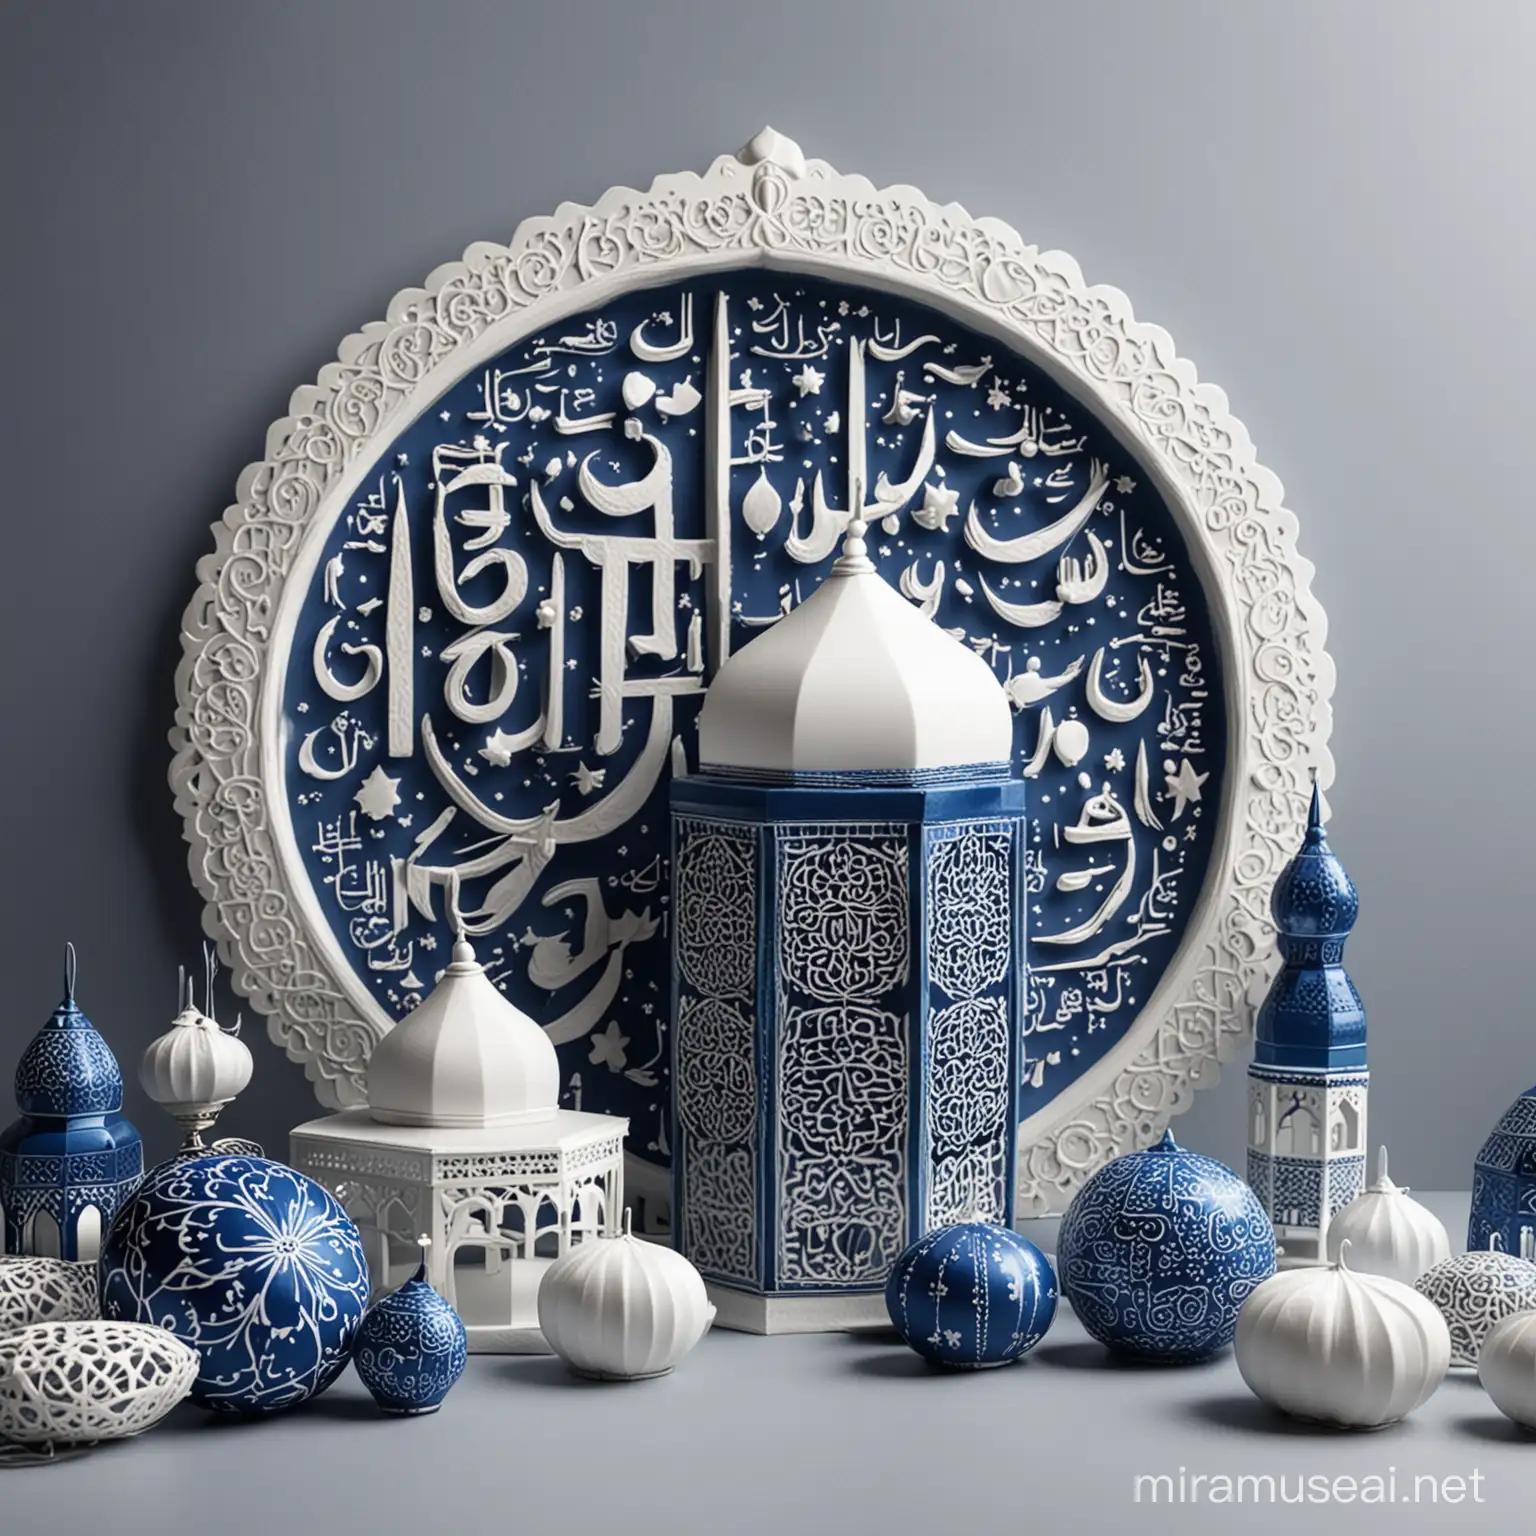 Eid al Fitr Celebration with Blue and White Islamic Decorations